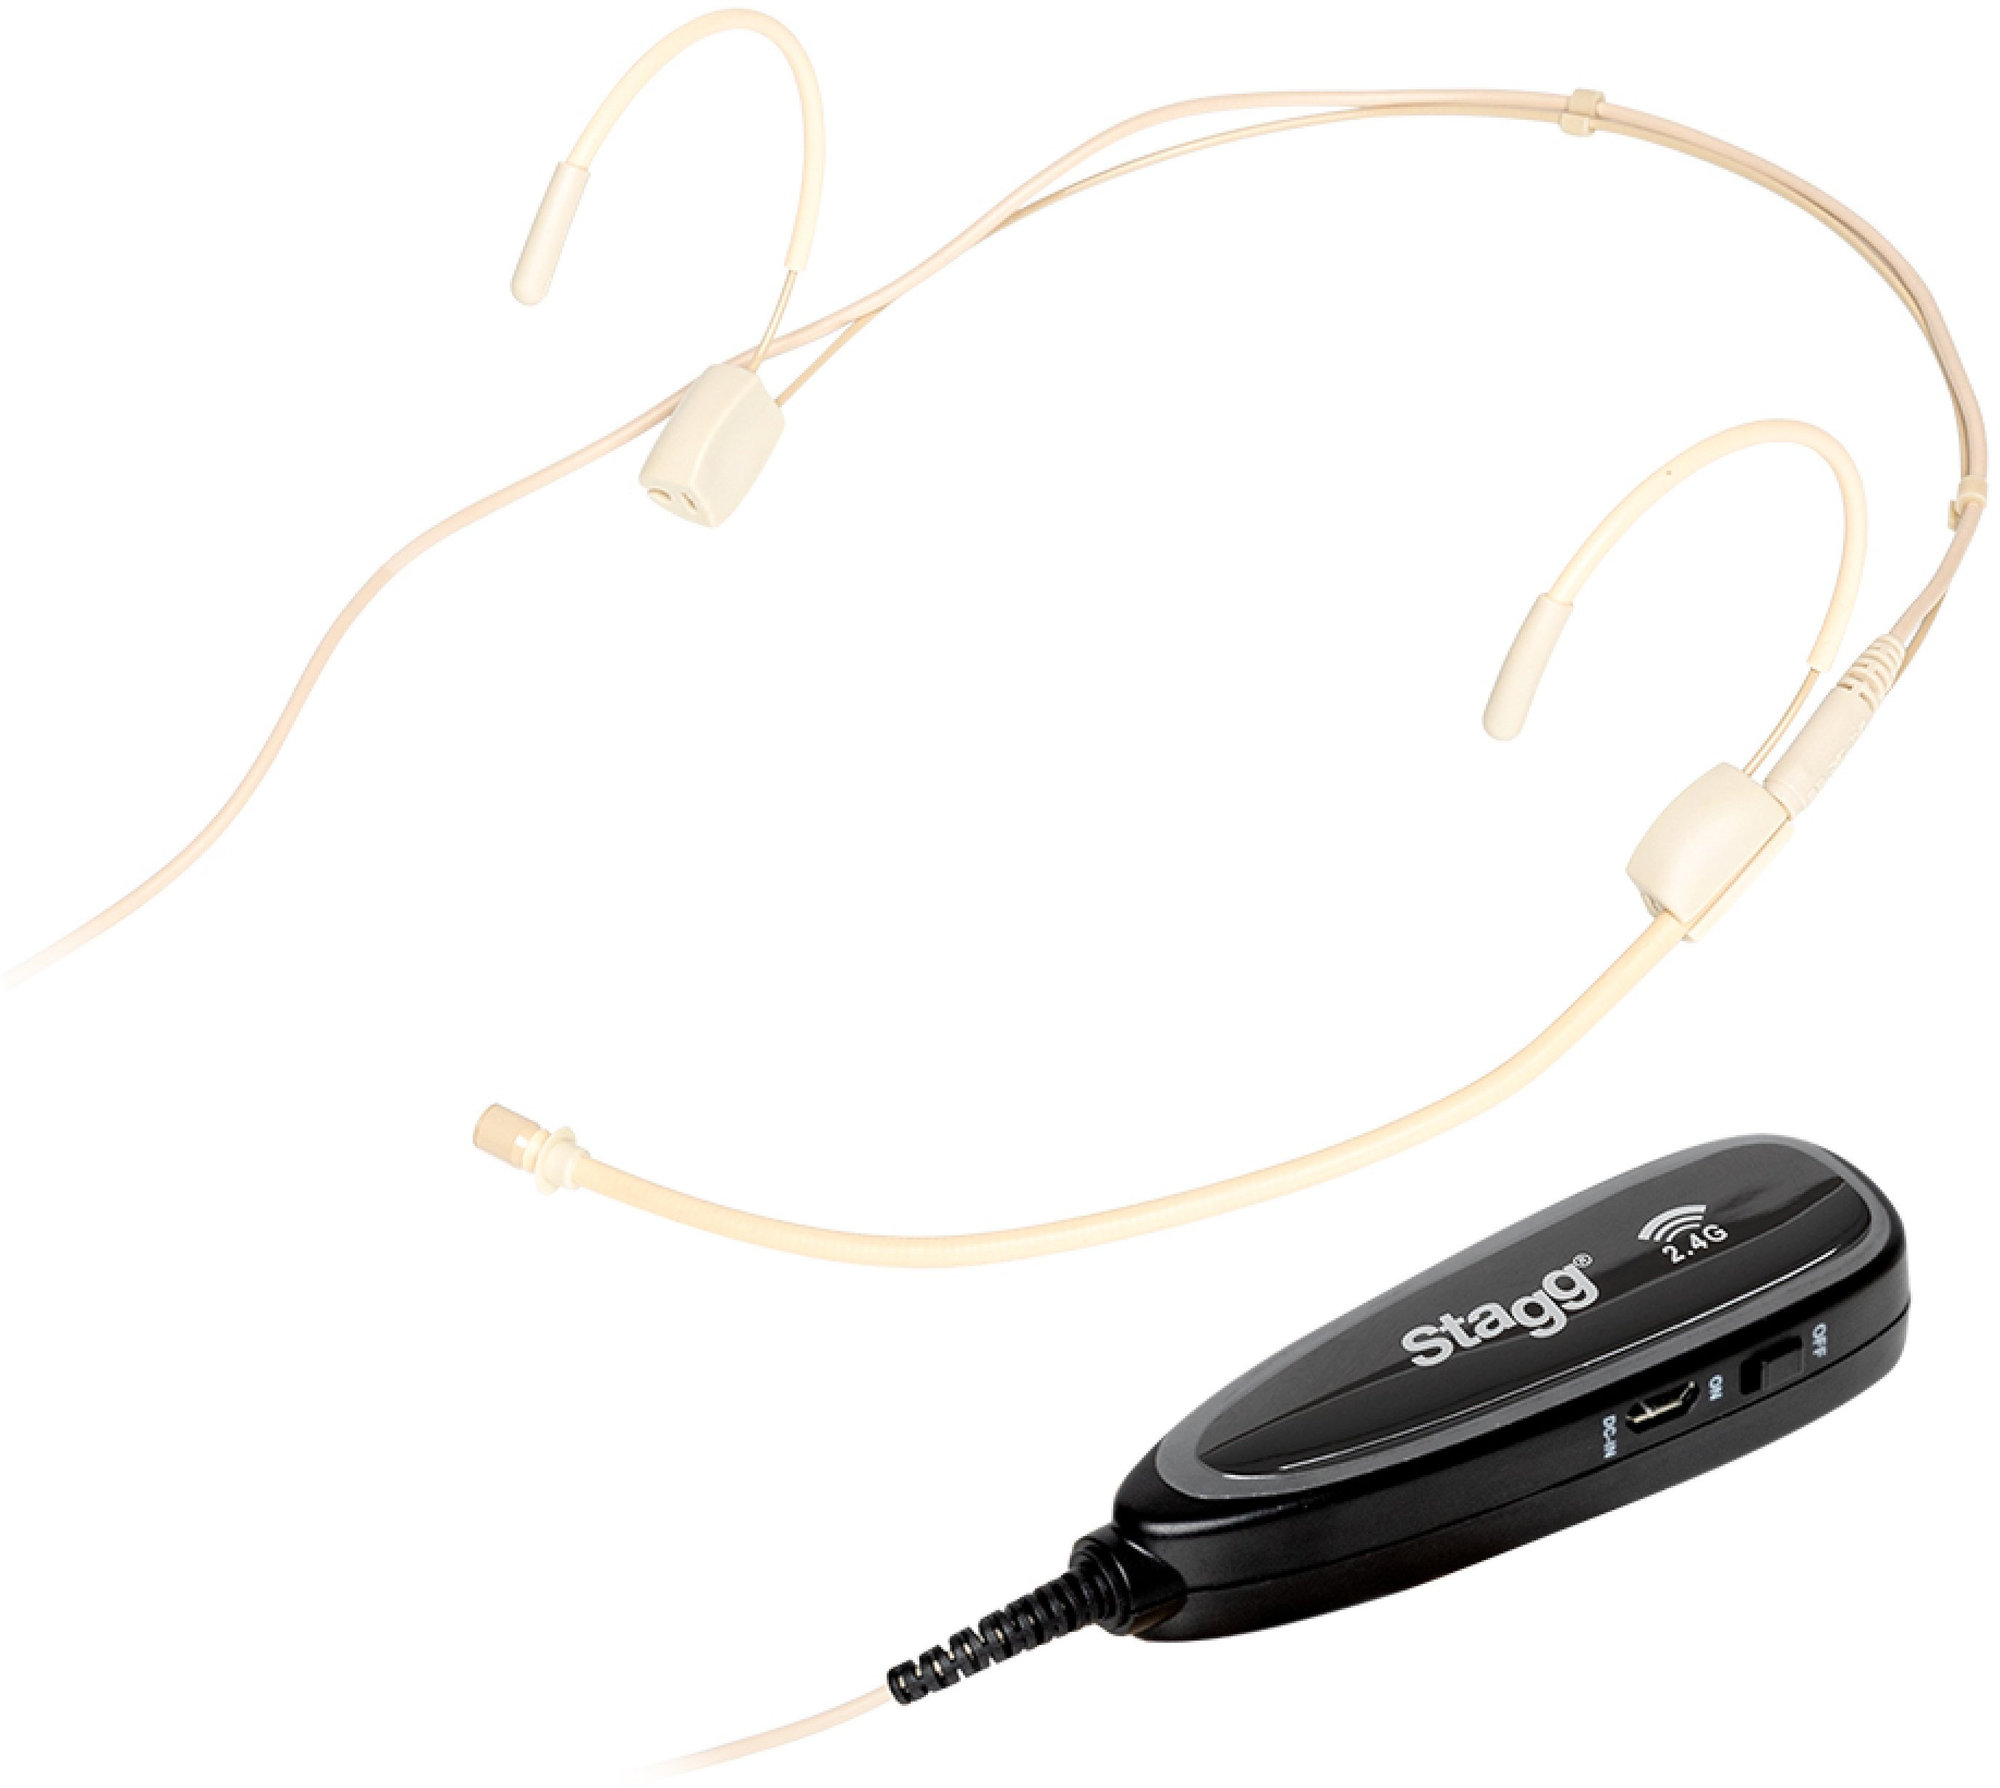 Stagg SUW 12H-BE UHF Beige Wireless Headset (2.4 GHz) Micro-casques sans fil